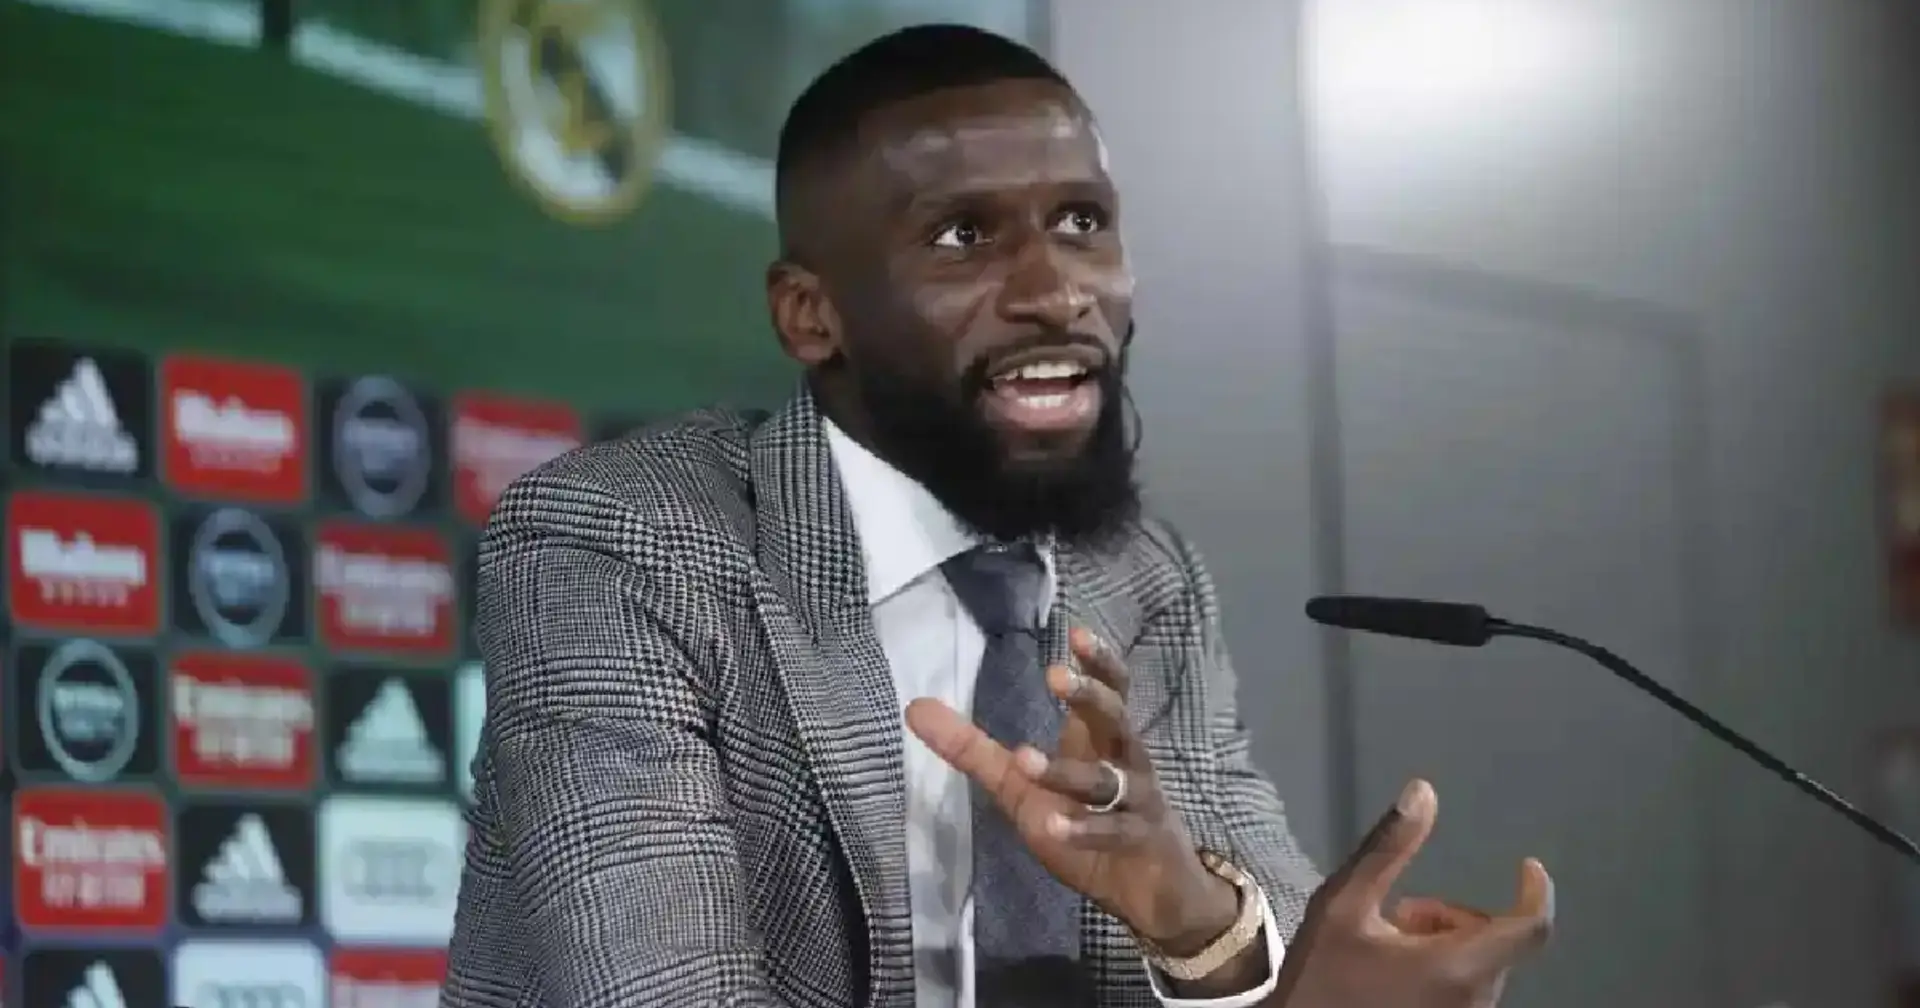 Rudiger reveals how his brother 'fooled' him about Madrid move ahead of Chelsea's game at Bernabeu